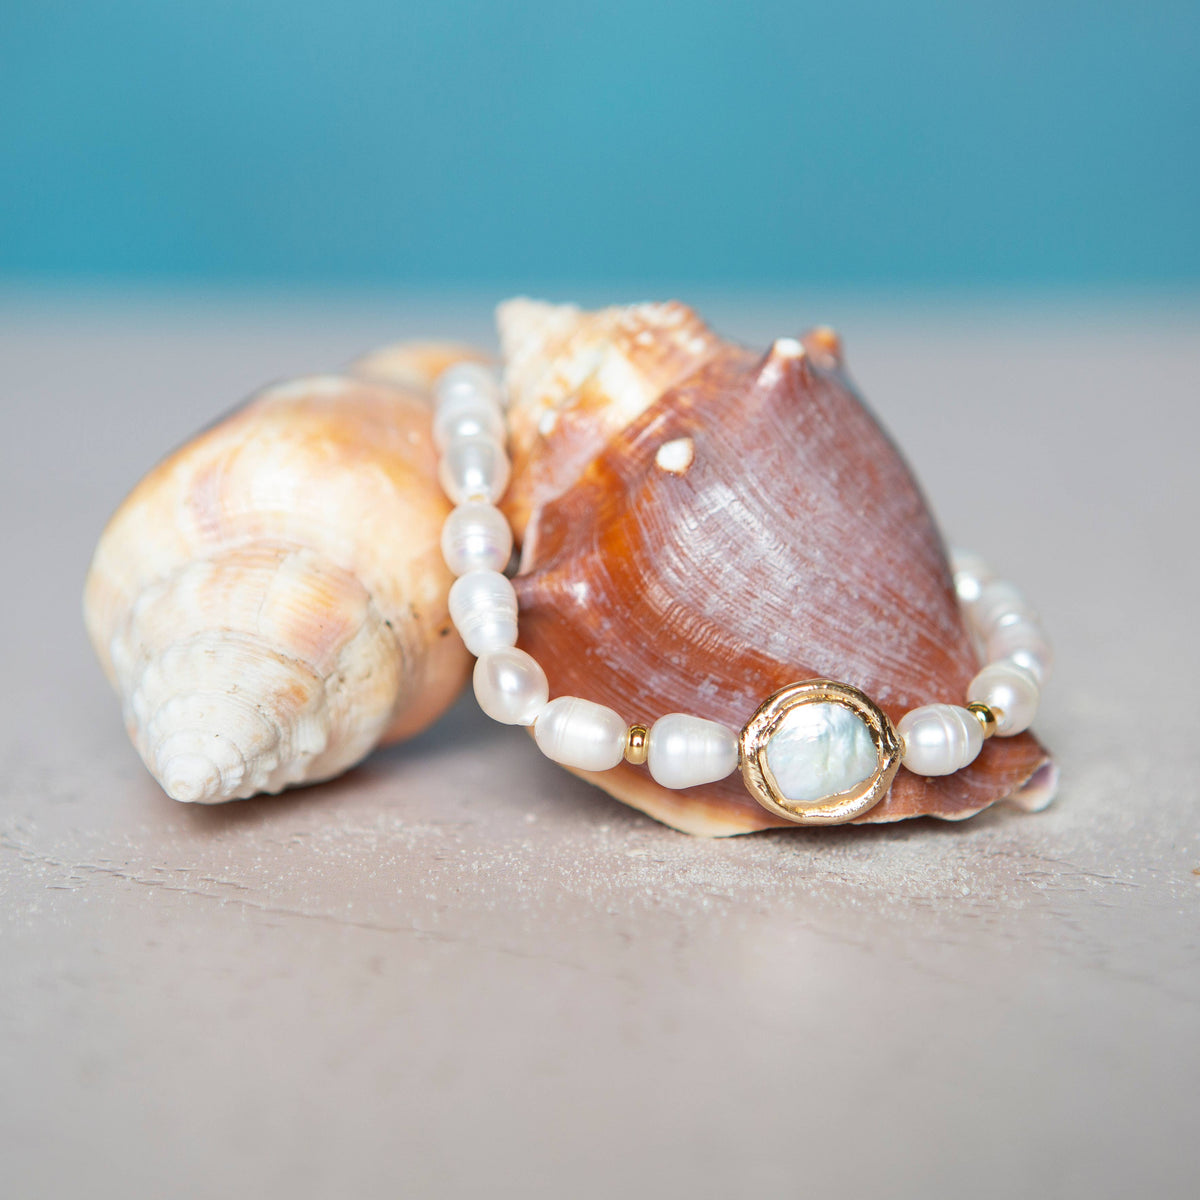 Lenny & Eva No Grit, No Pearl bracelet. A bracelet with irregular shaped freshwater pearl beads for the band and a circular focal pearl inside a gold colored circle. Bracelet is draped over a seashell